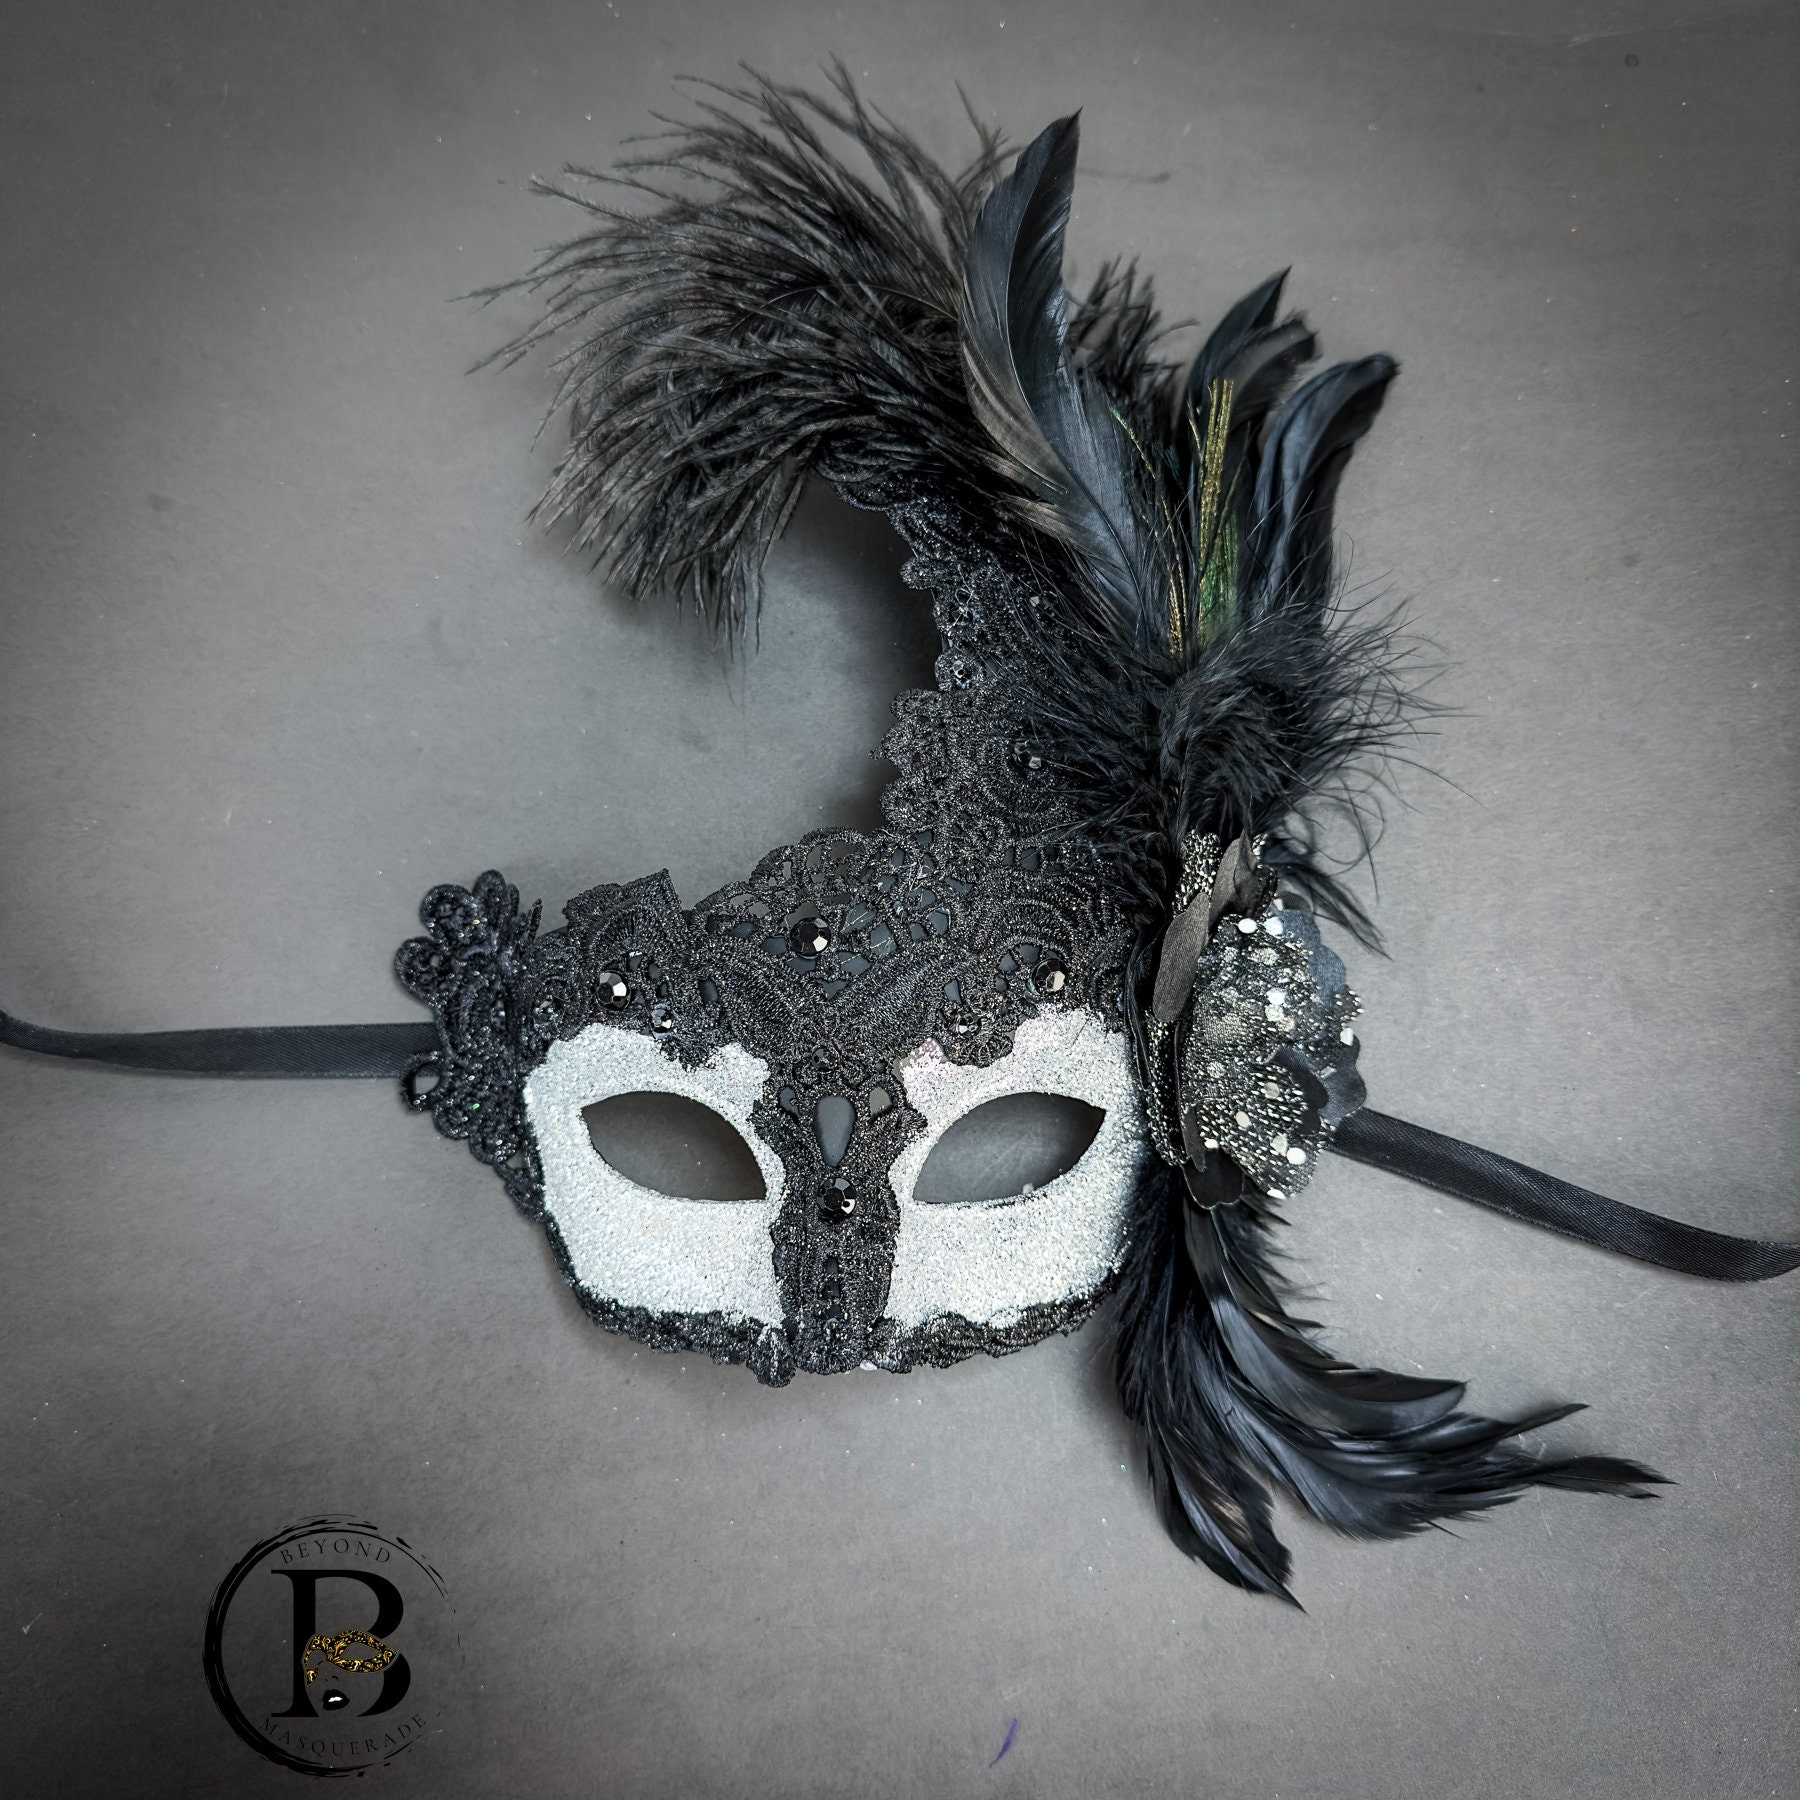 White Feather Masquerade Mask Wedding Brides Prom Party Mask by Beyond Masquerade